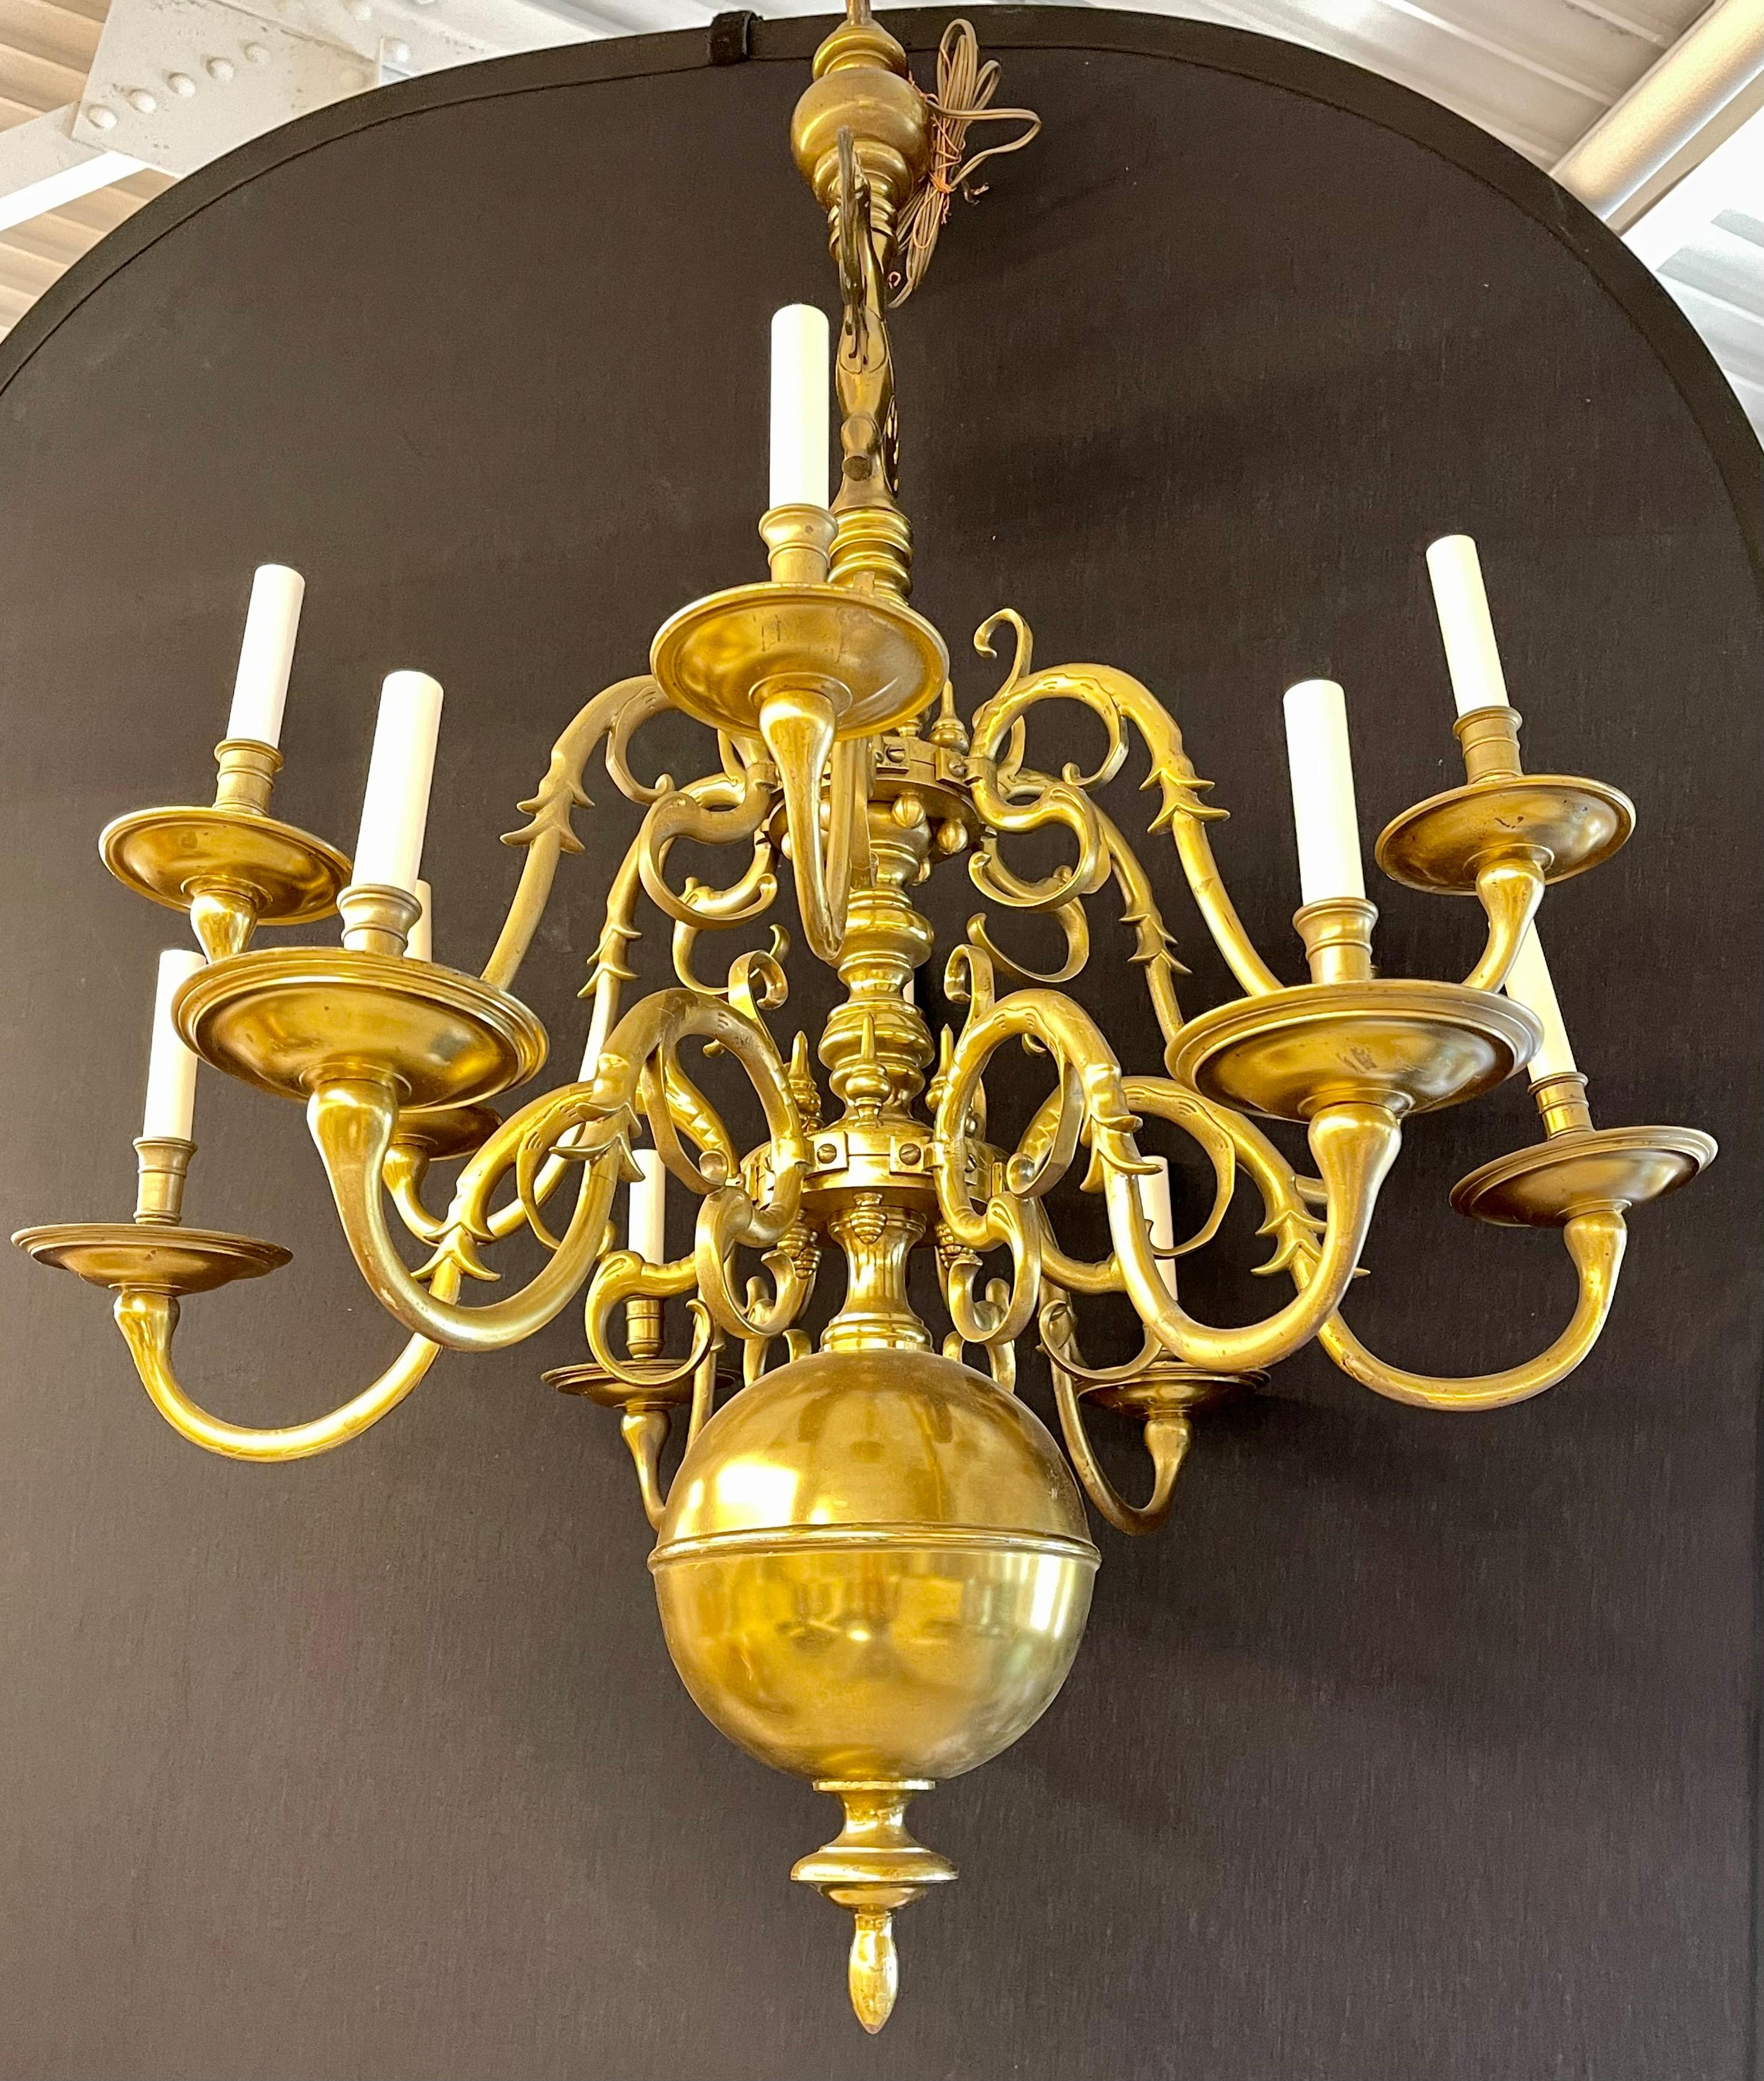 English Georgian style bronze chandelier having a pair of rare winged eagles on top of the many scrolled and lighted arms attached to a turned column ending with large brass orb and finial. Late 19th century/ early 20th century.